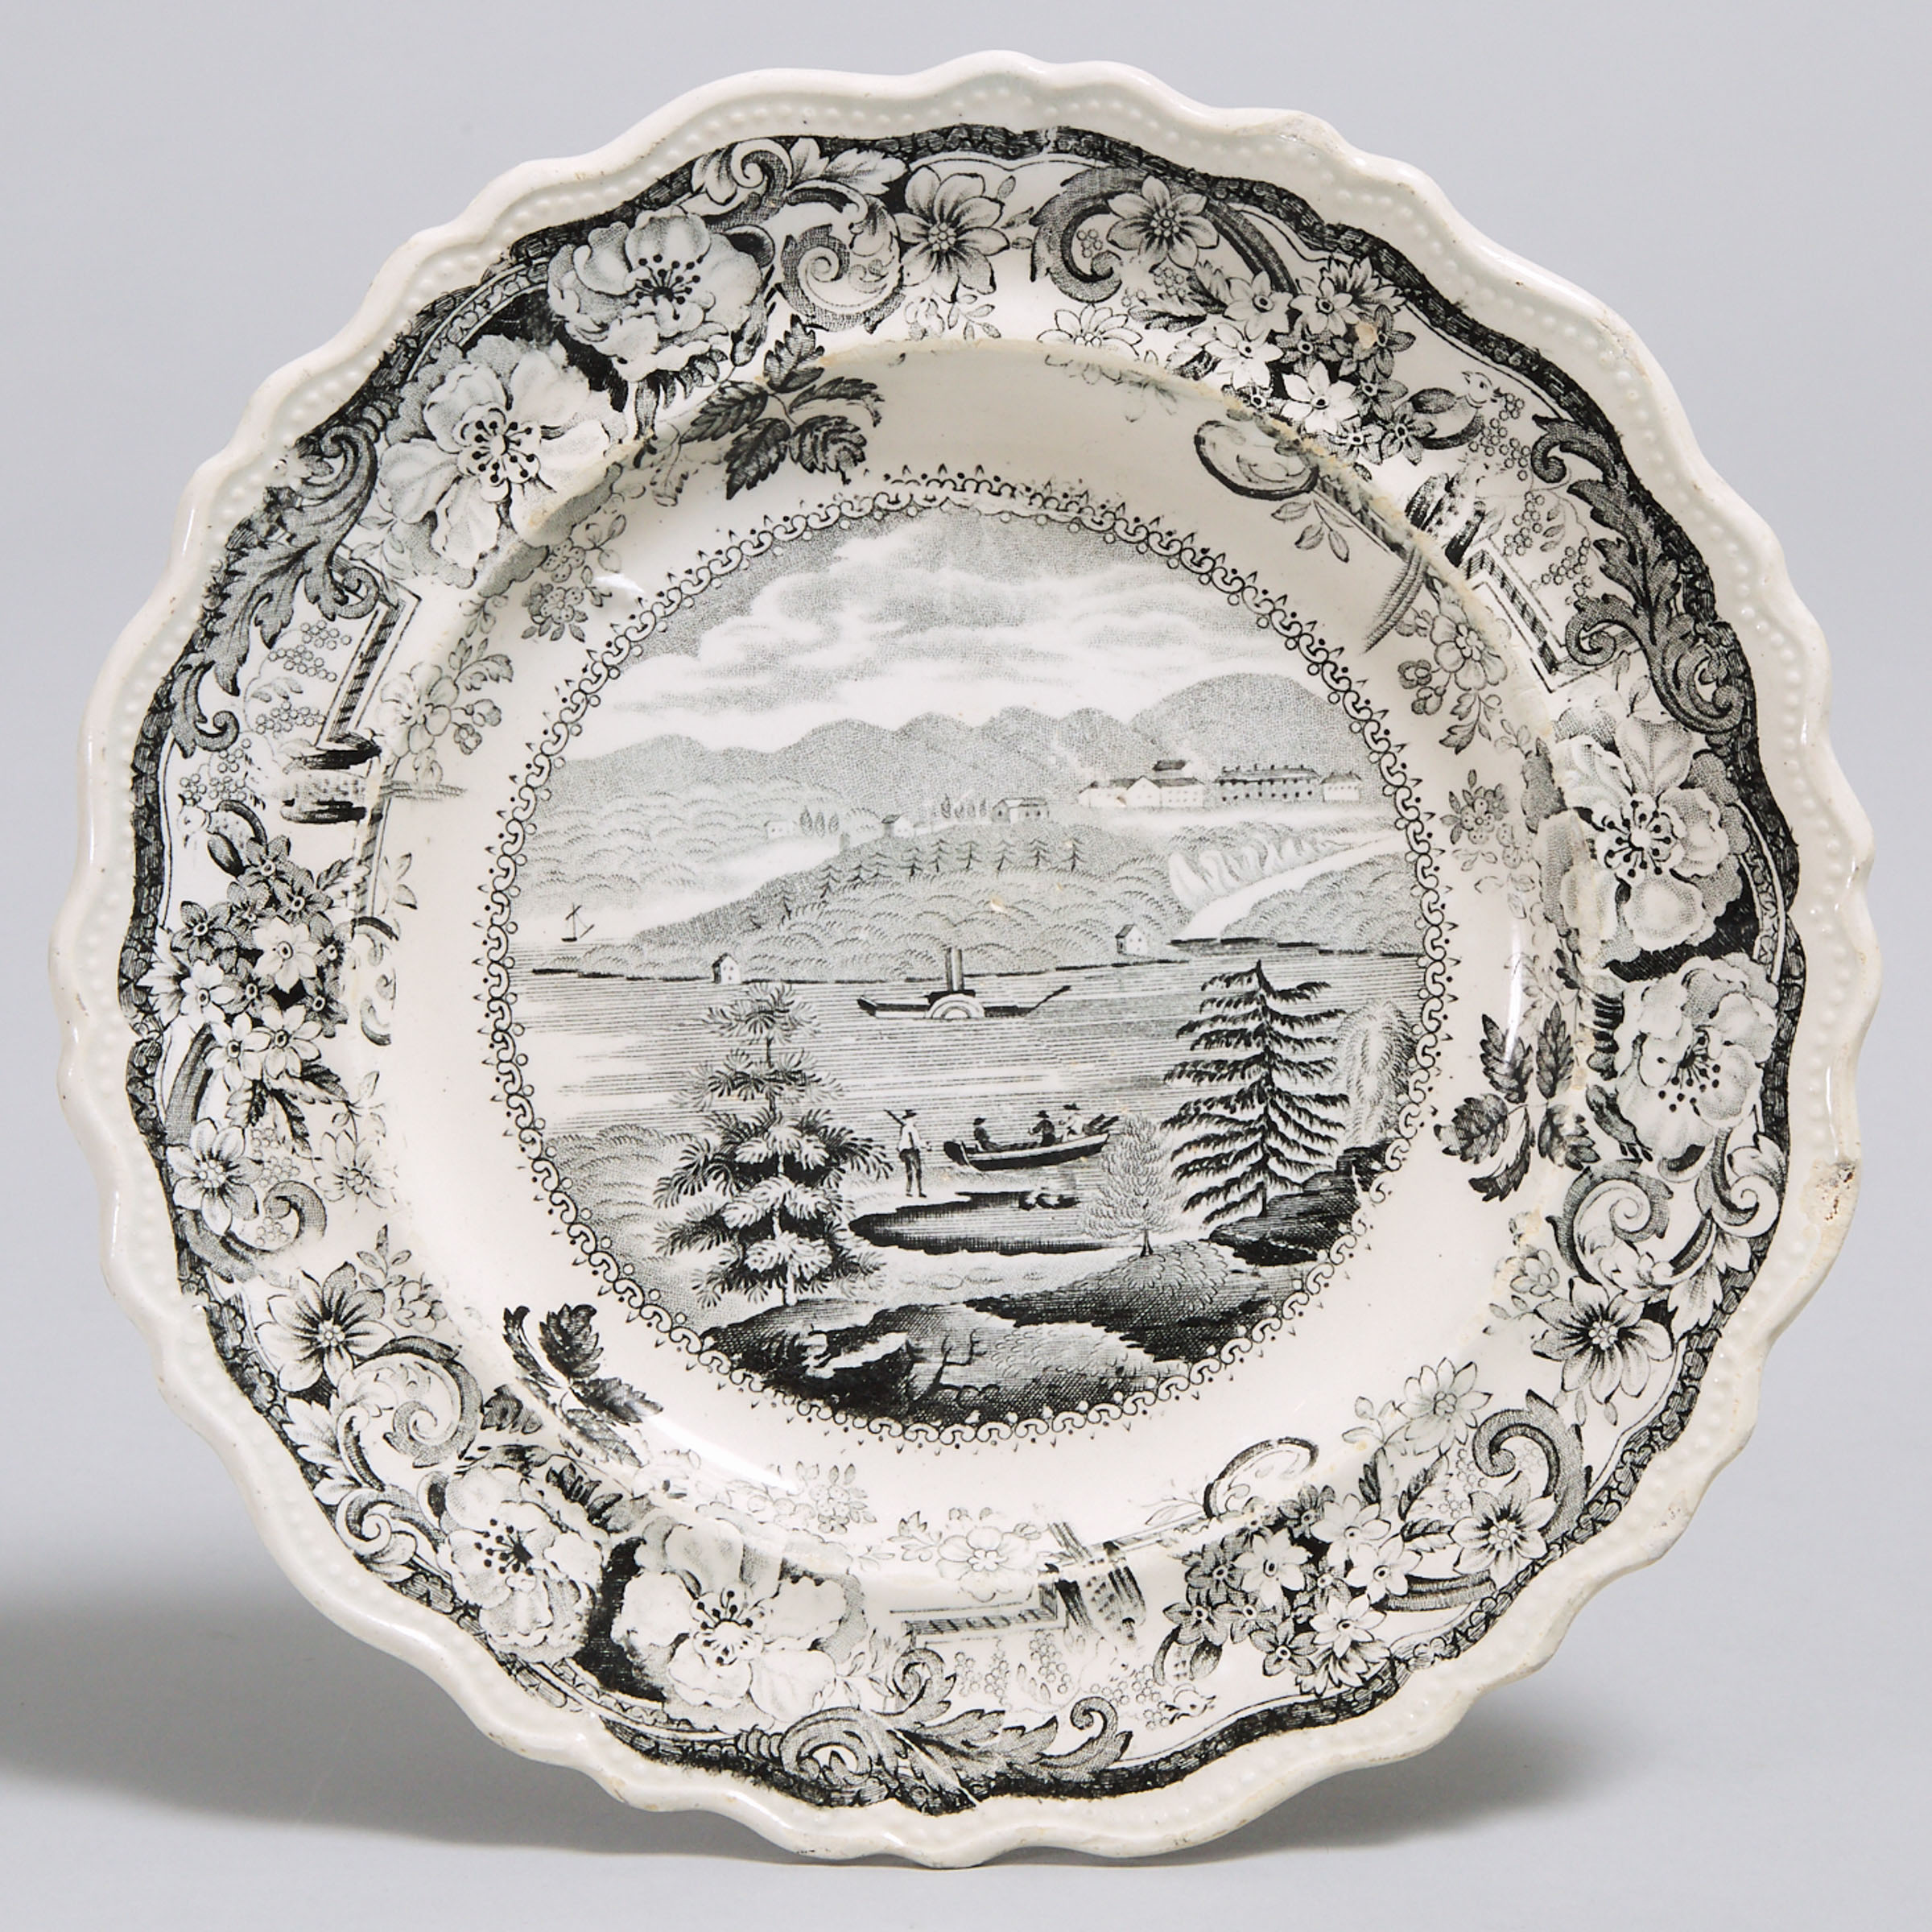 Staffordshire Black-Printed Plate, 'Picturesque Views, West Point, Hudson River', James & Ralph Clews, c.1835 